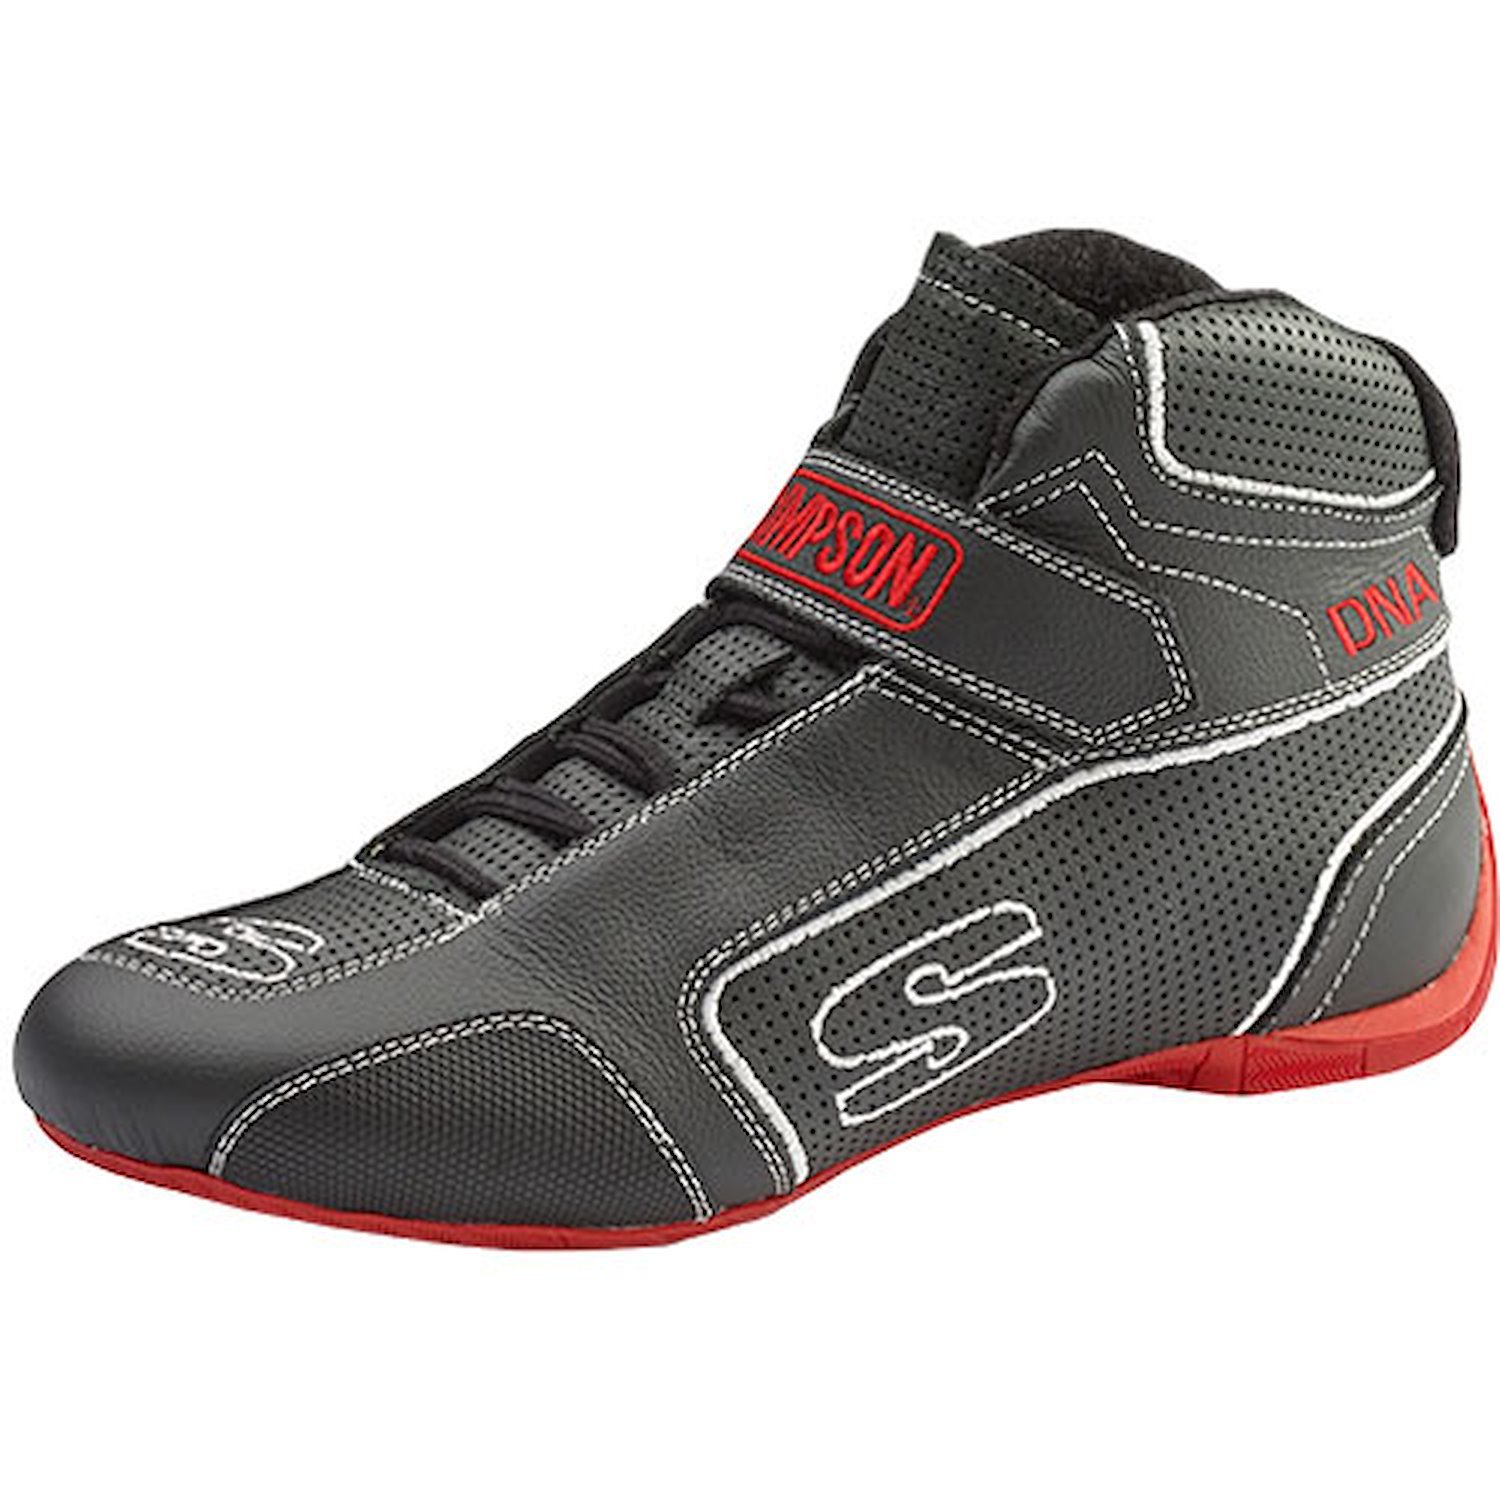 SFI 3.3/5 DNA Racing Shoes Size: 9.5